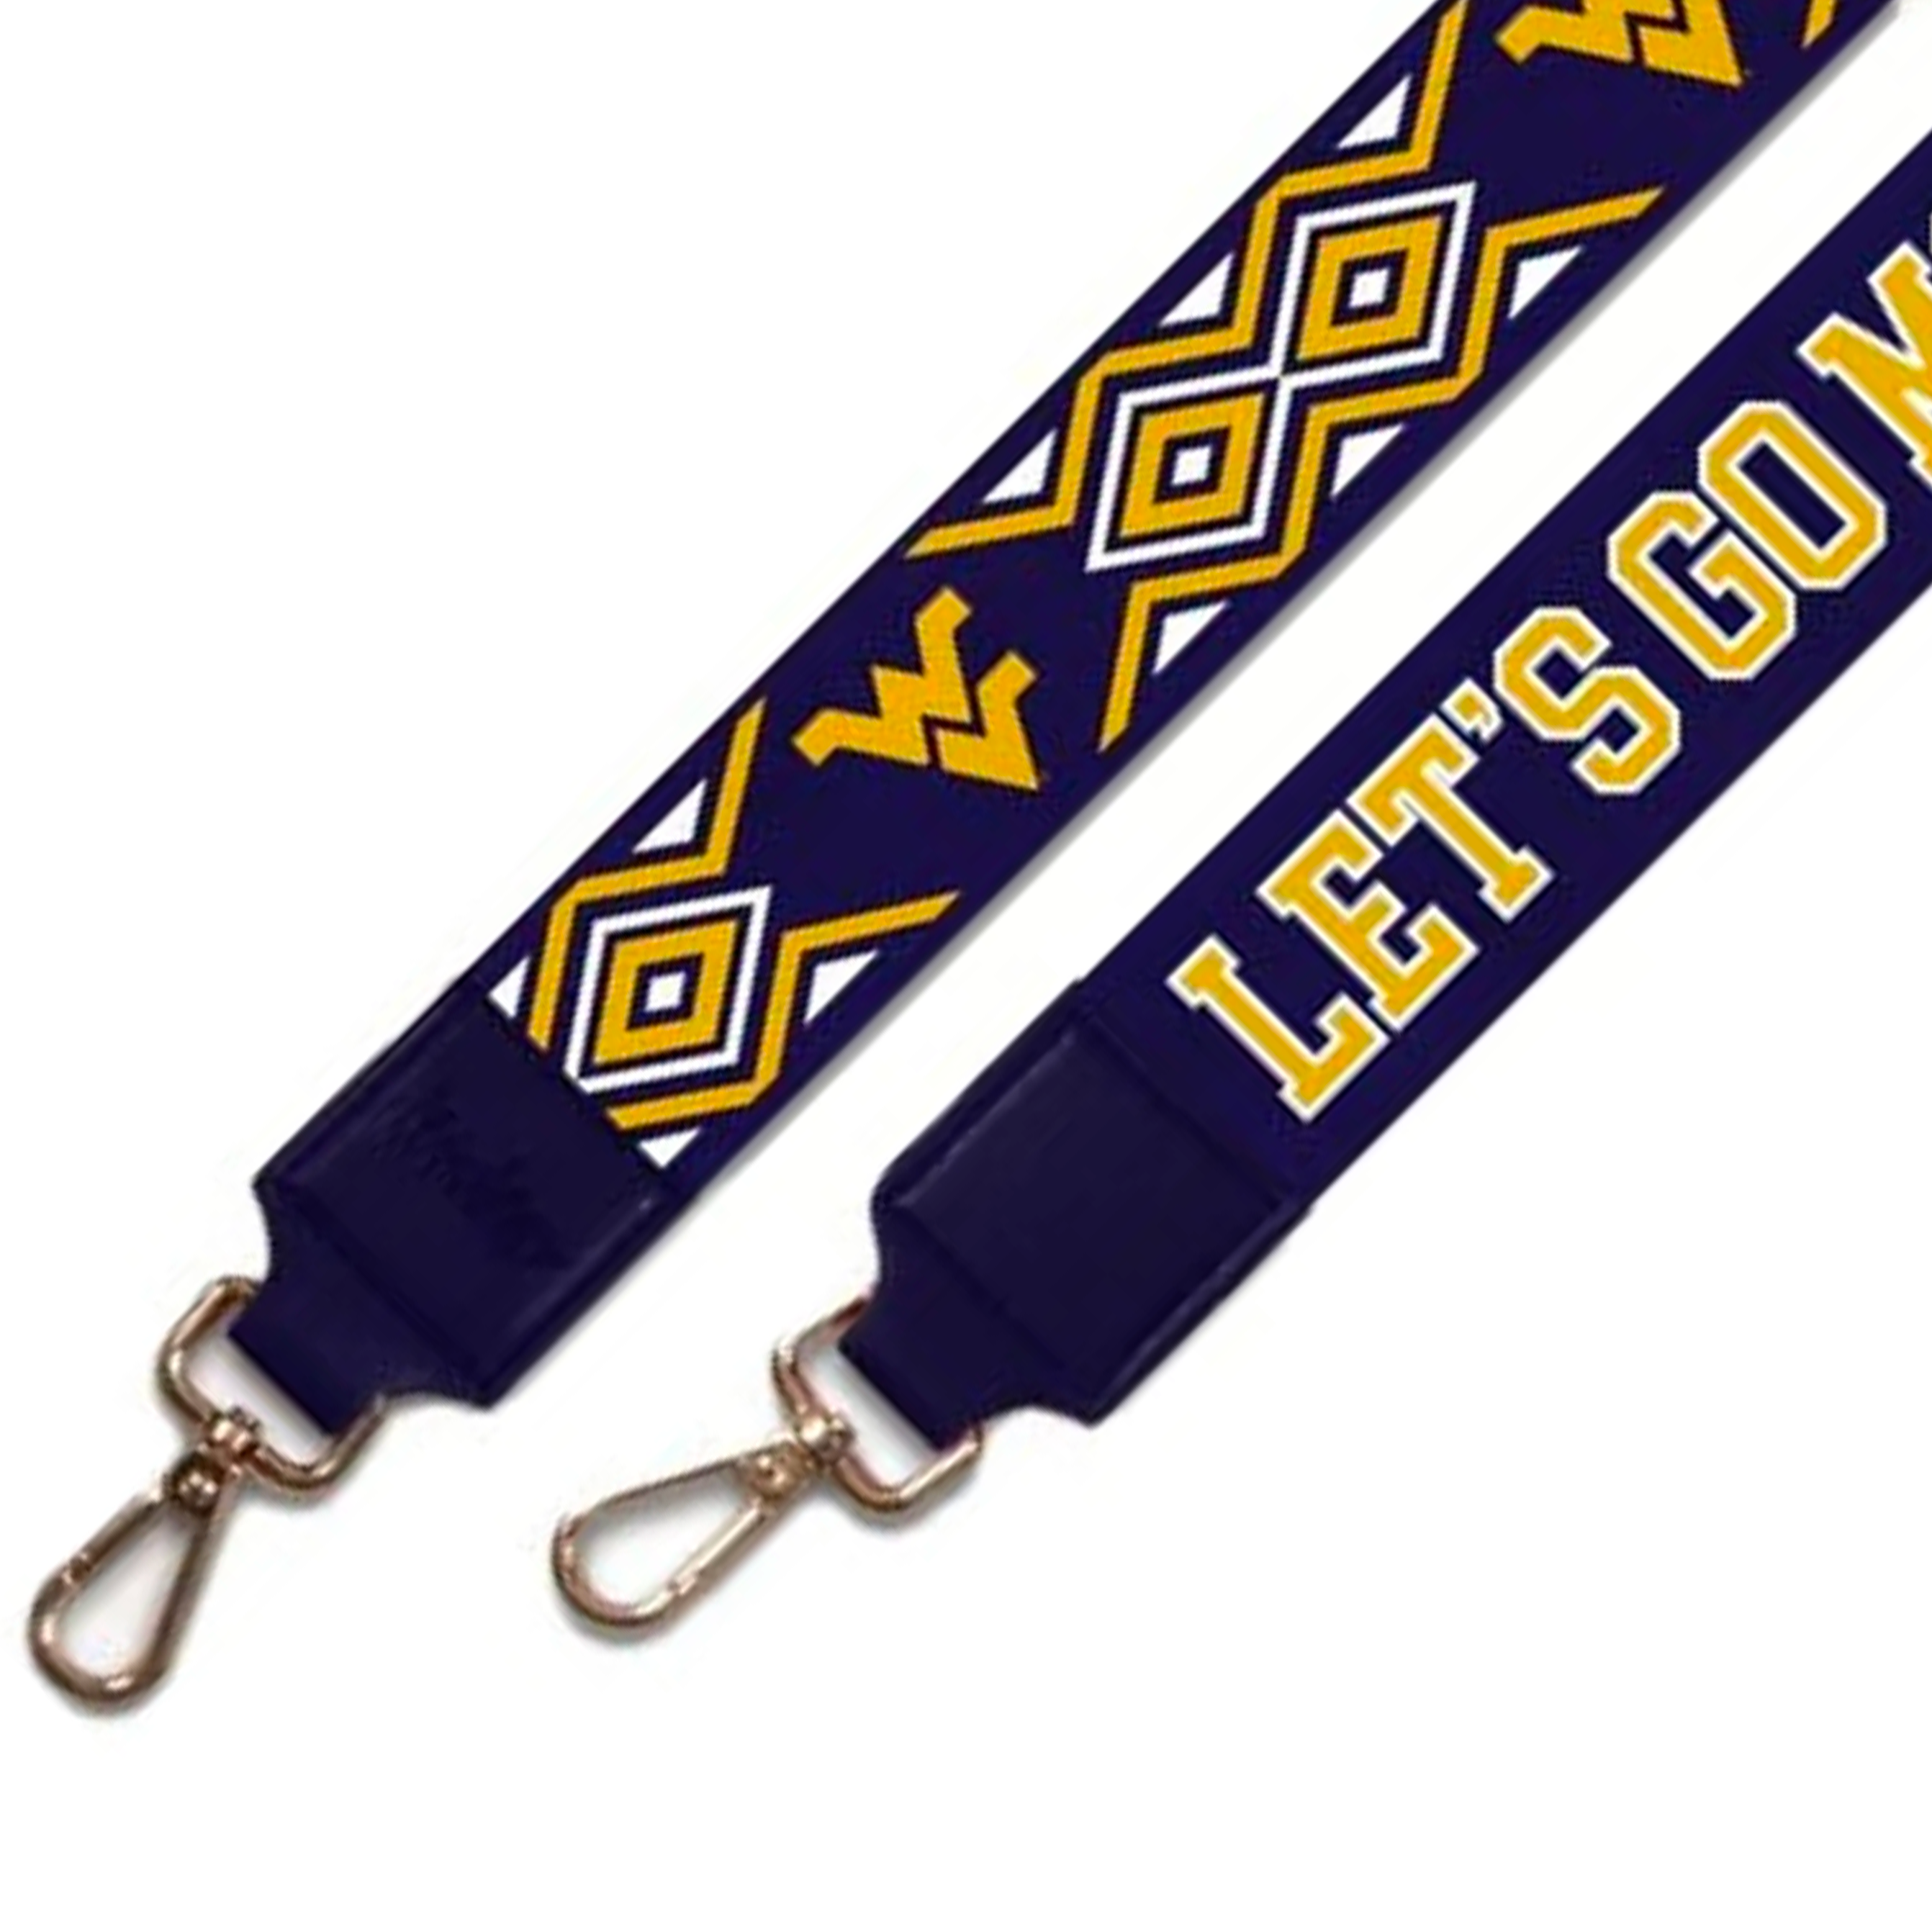 WEST VIRGINIA 2" - Officially Licensed - Ikat Design